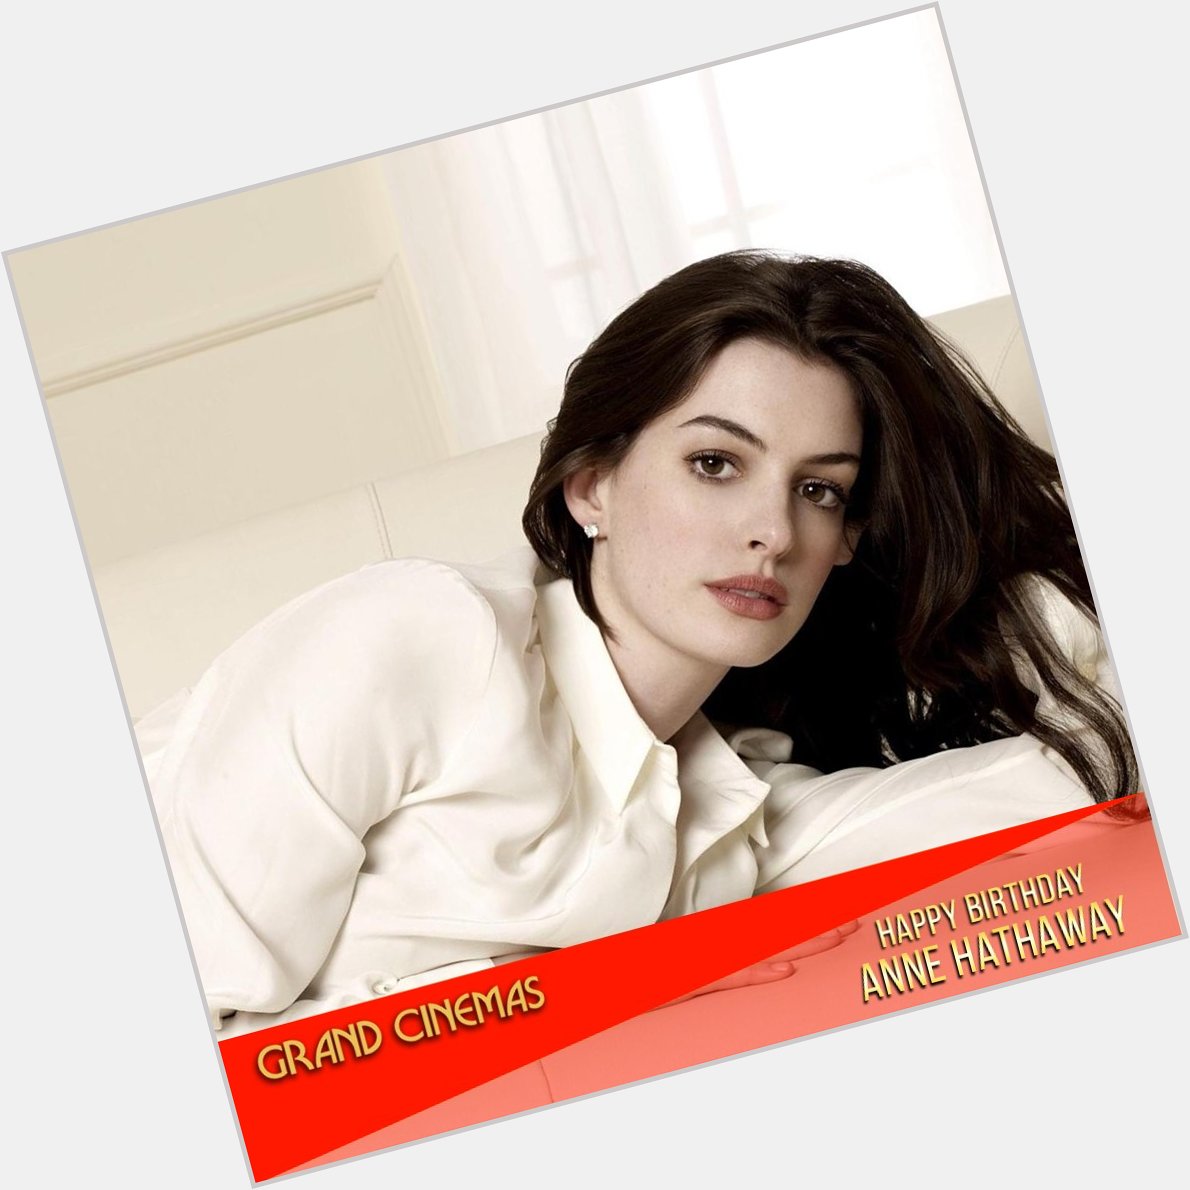 Wishing the gorgeous and versatile actress, Anne Hathaway, a very happy birthday! 